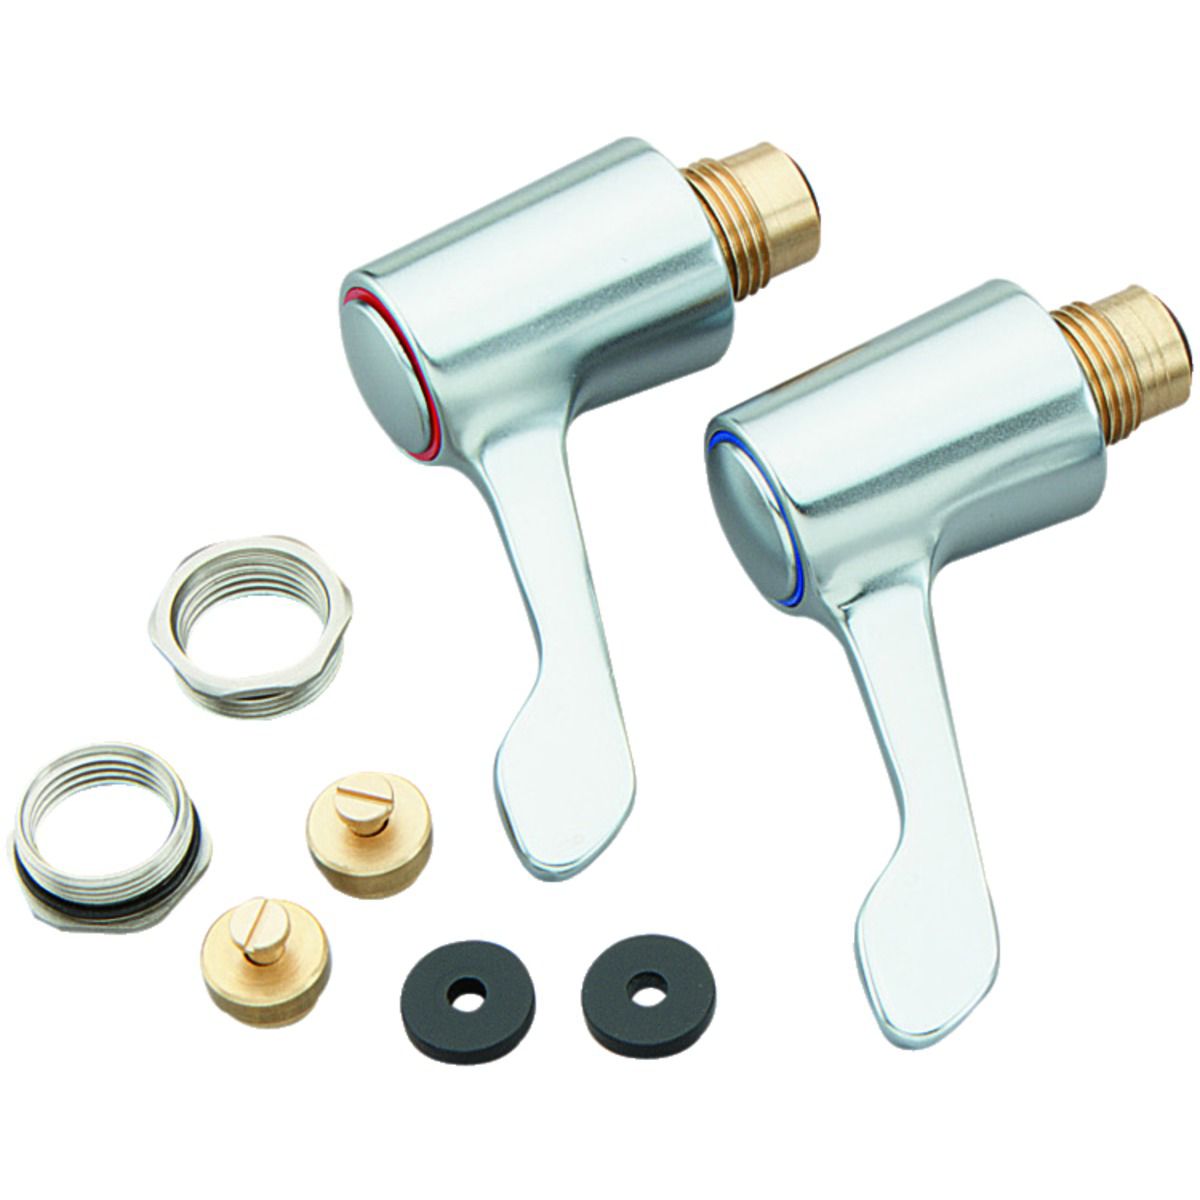 Image of Primaflow Sink & Basin Lever Tap Head Conversion Kit - Chrome